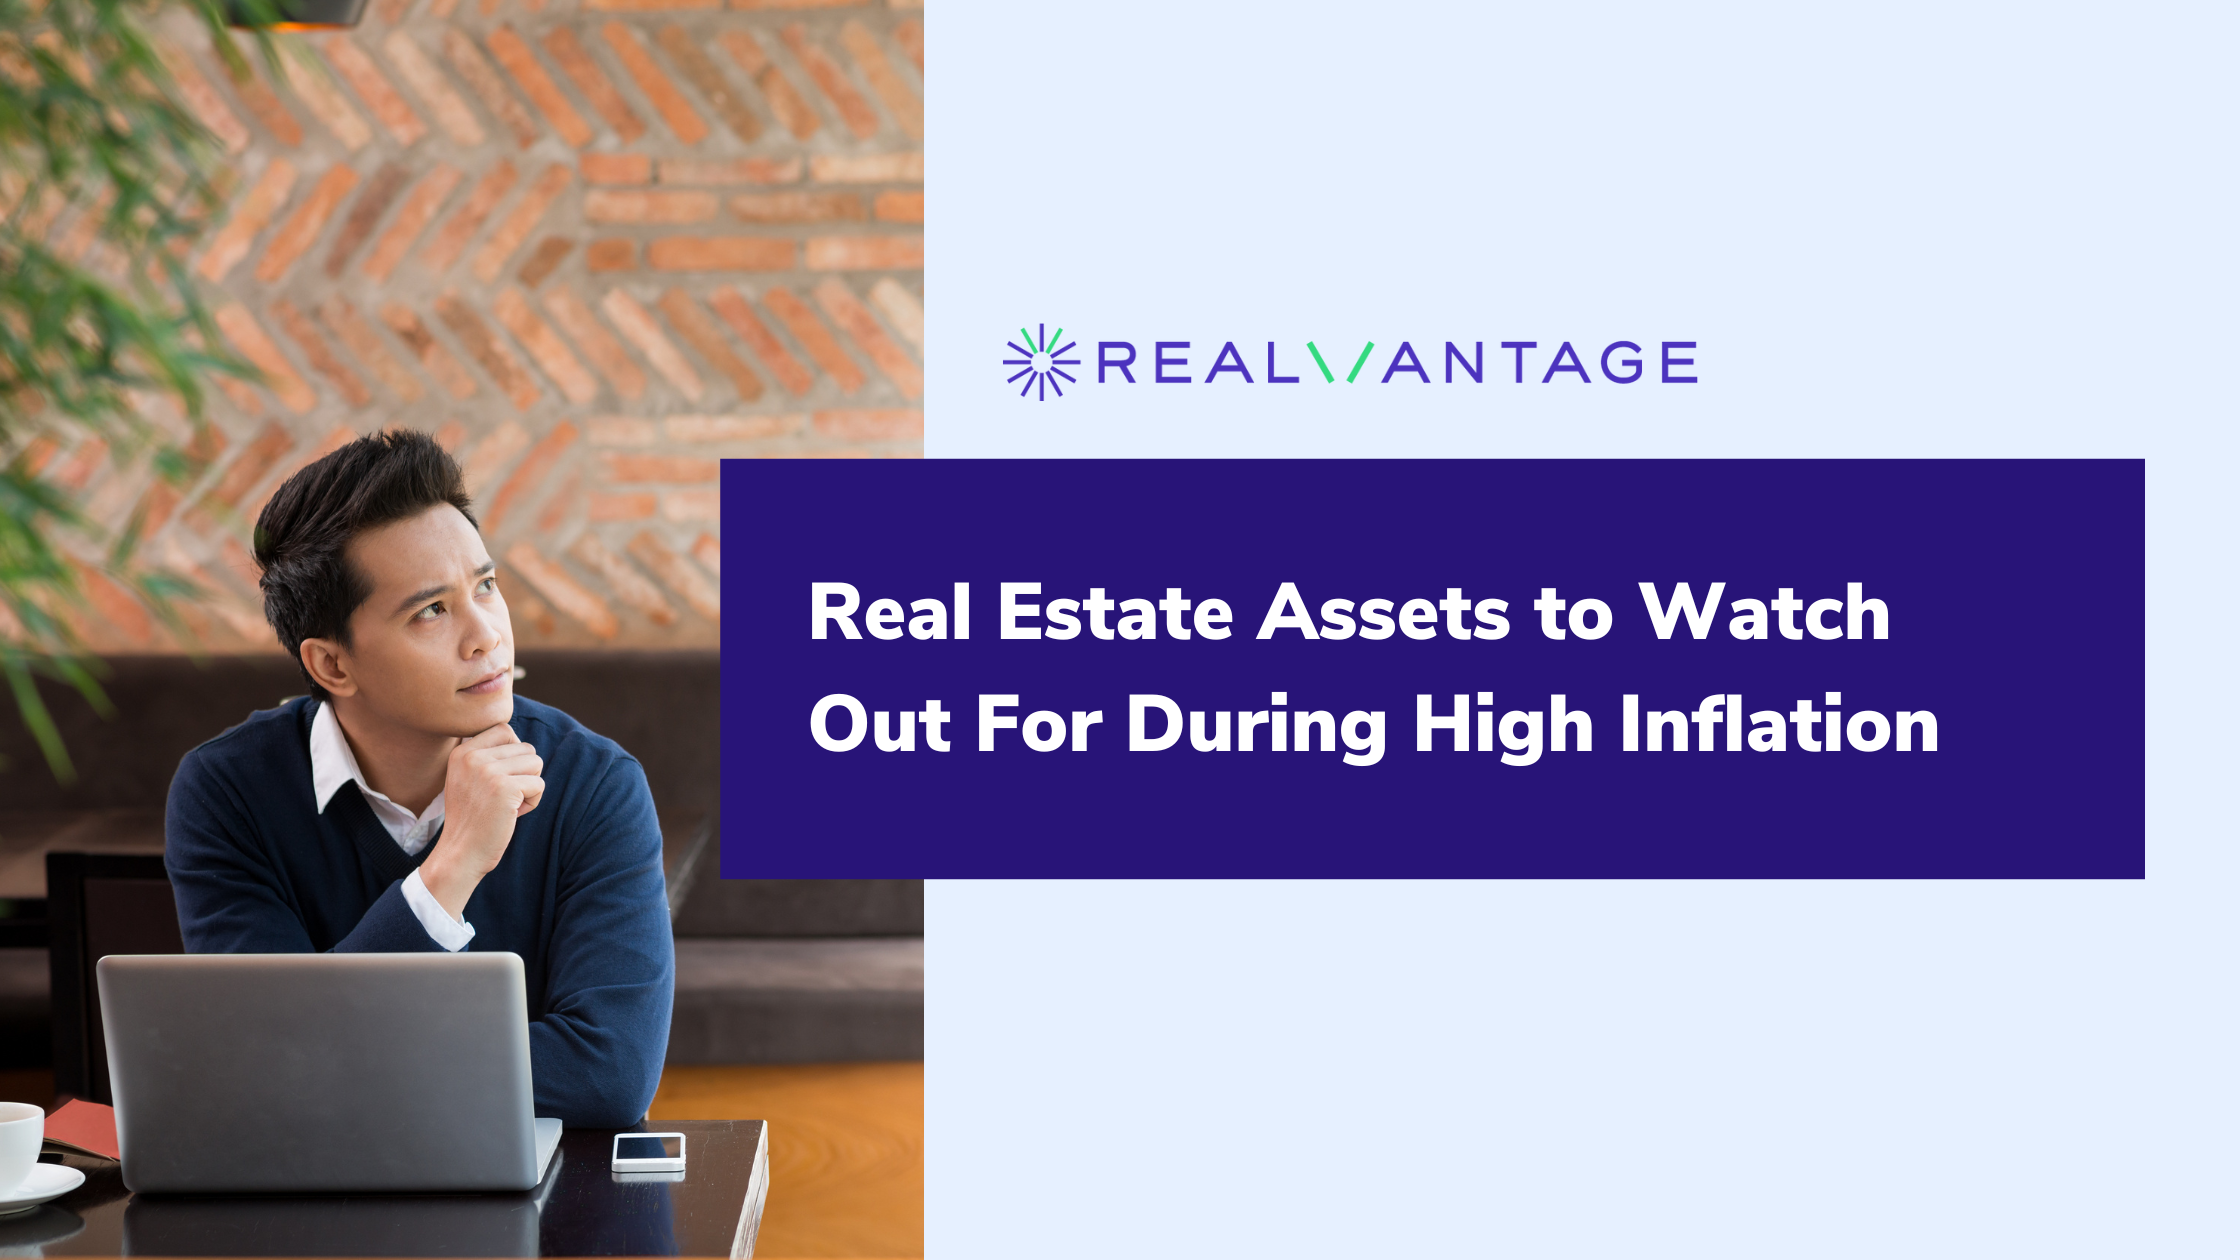 Real Estate Assets to Watch Out For During High Inflation